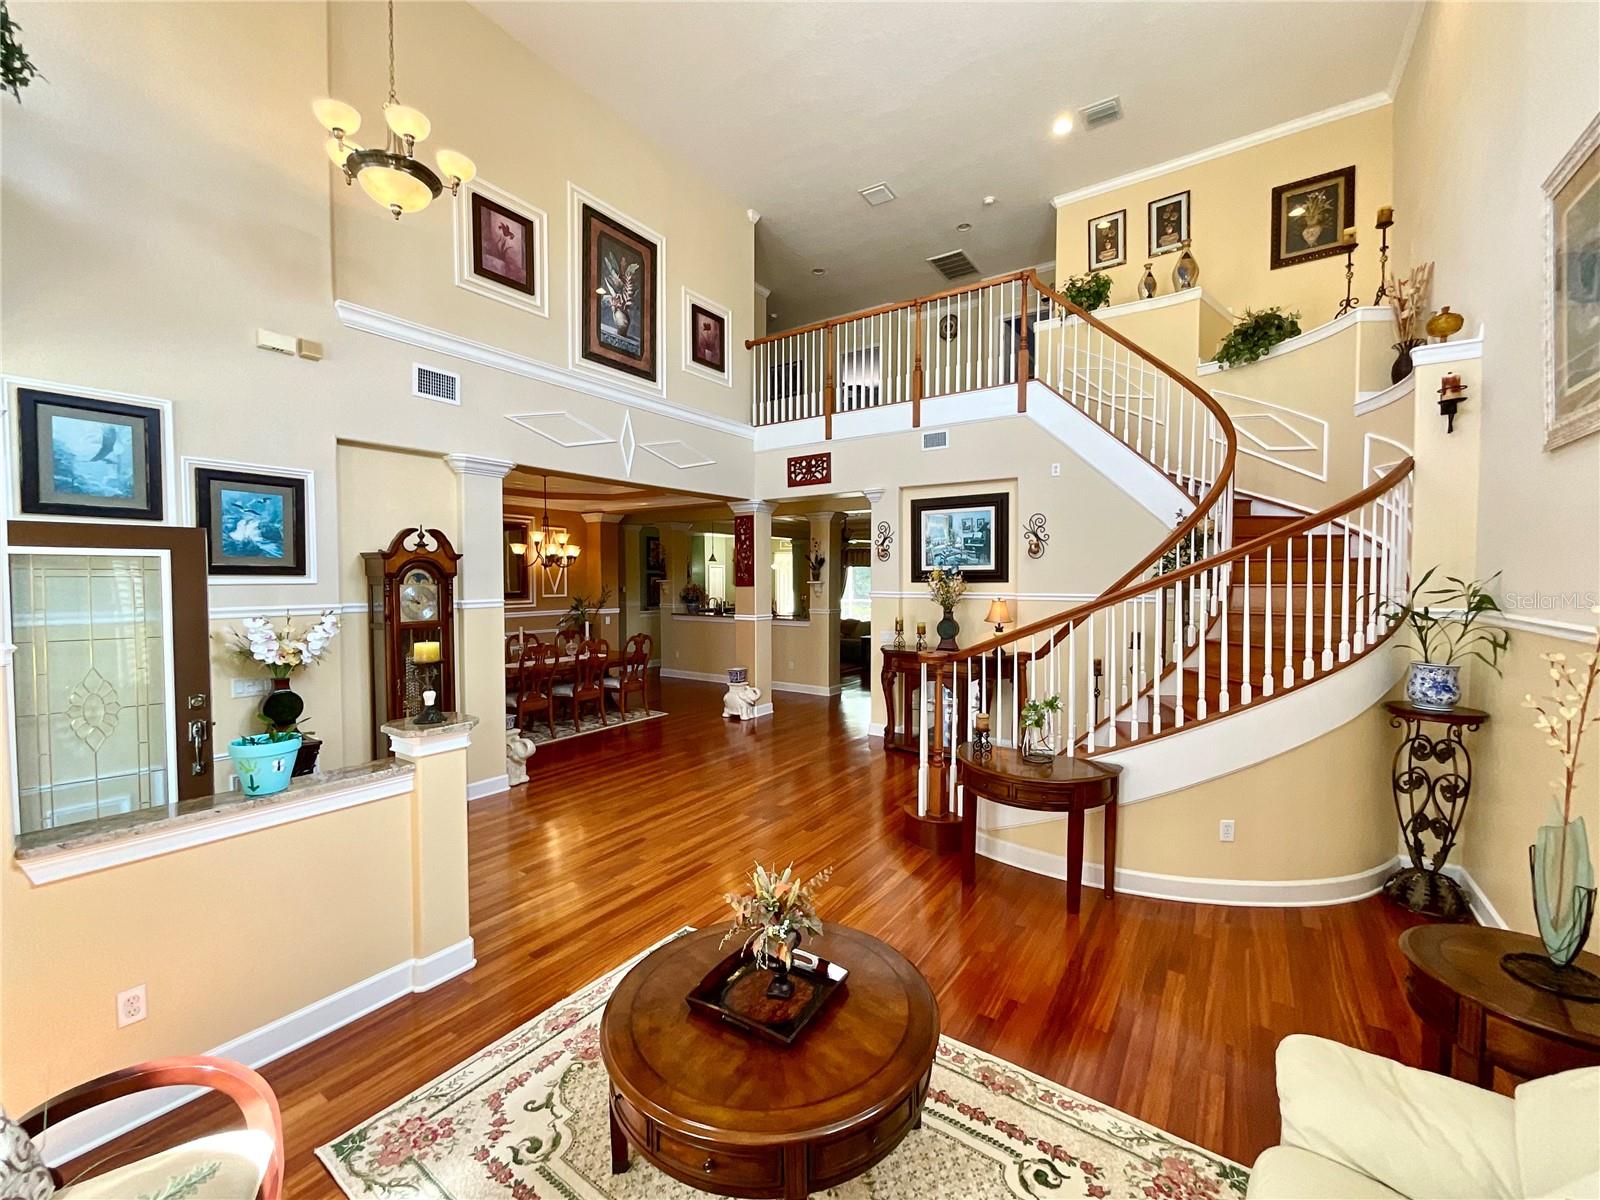 LIVING ROOM AND SPIRAL STAIRS